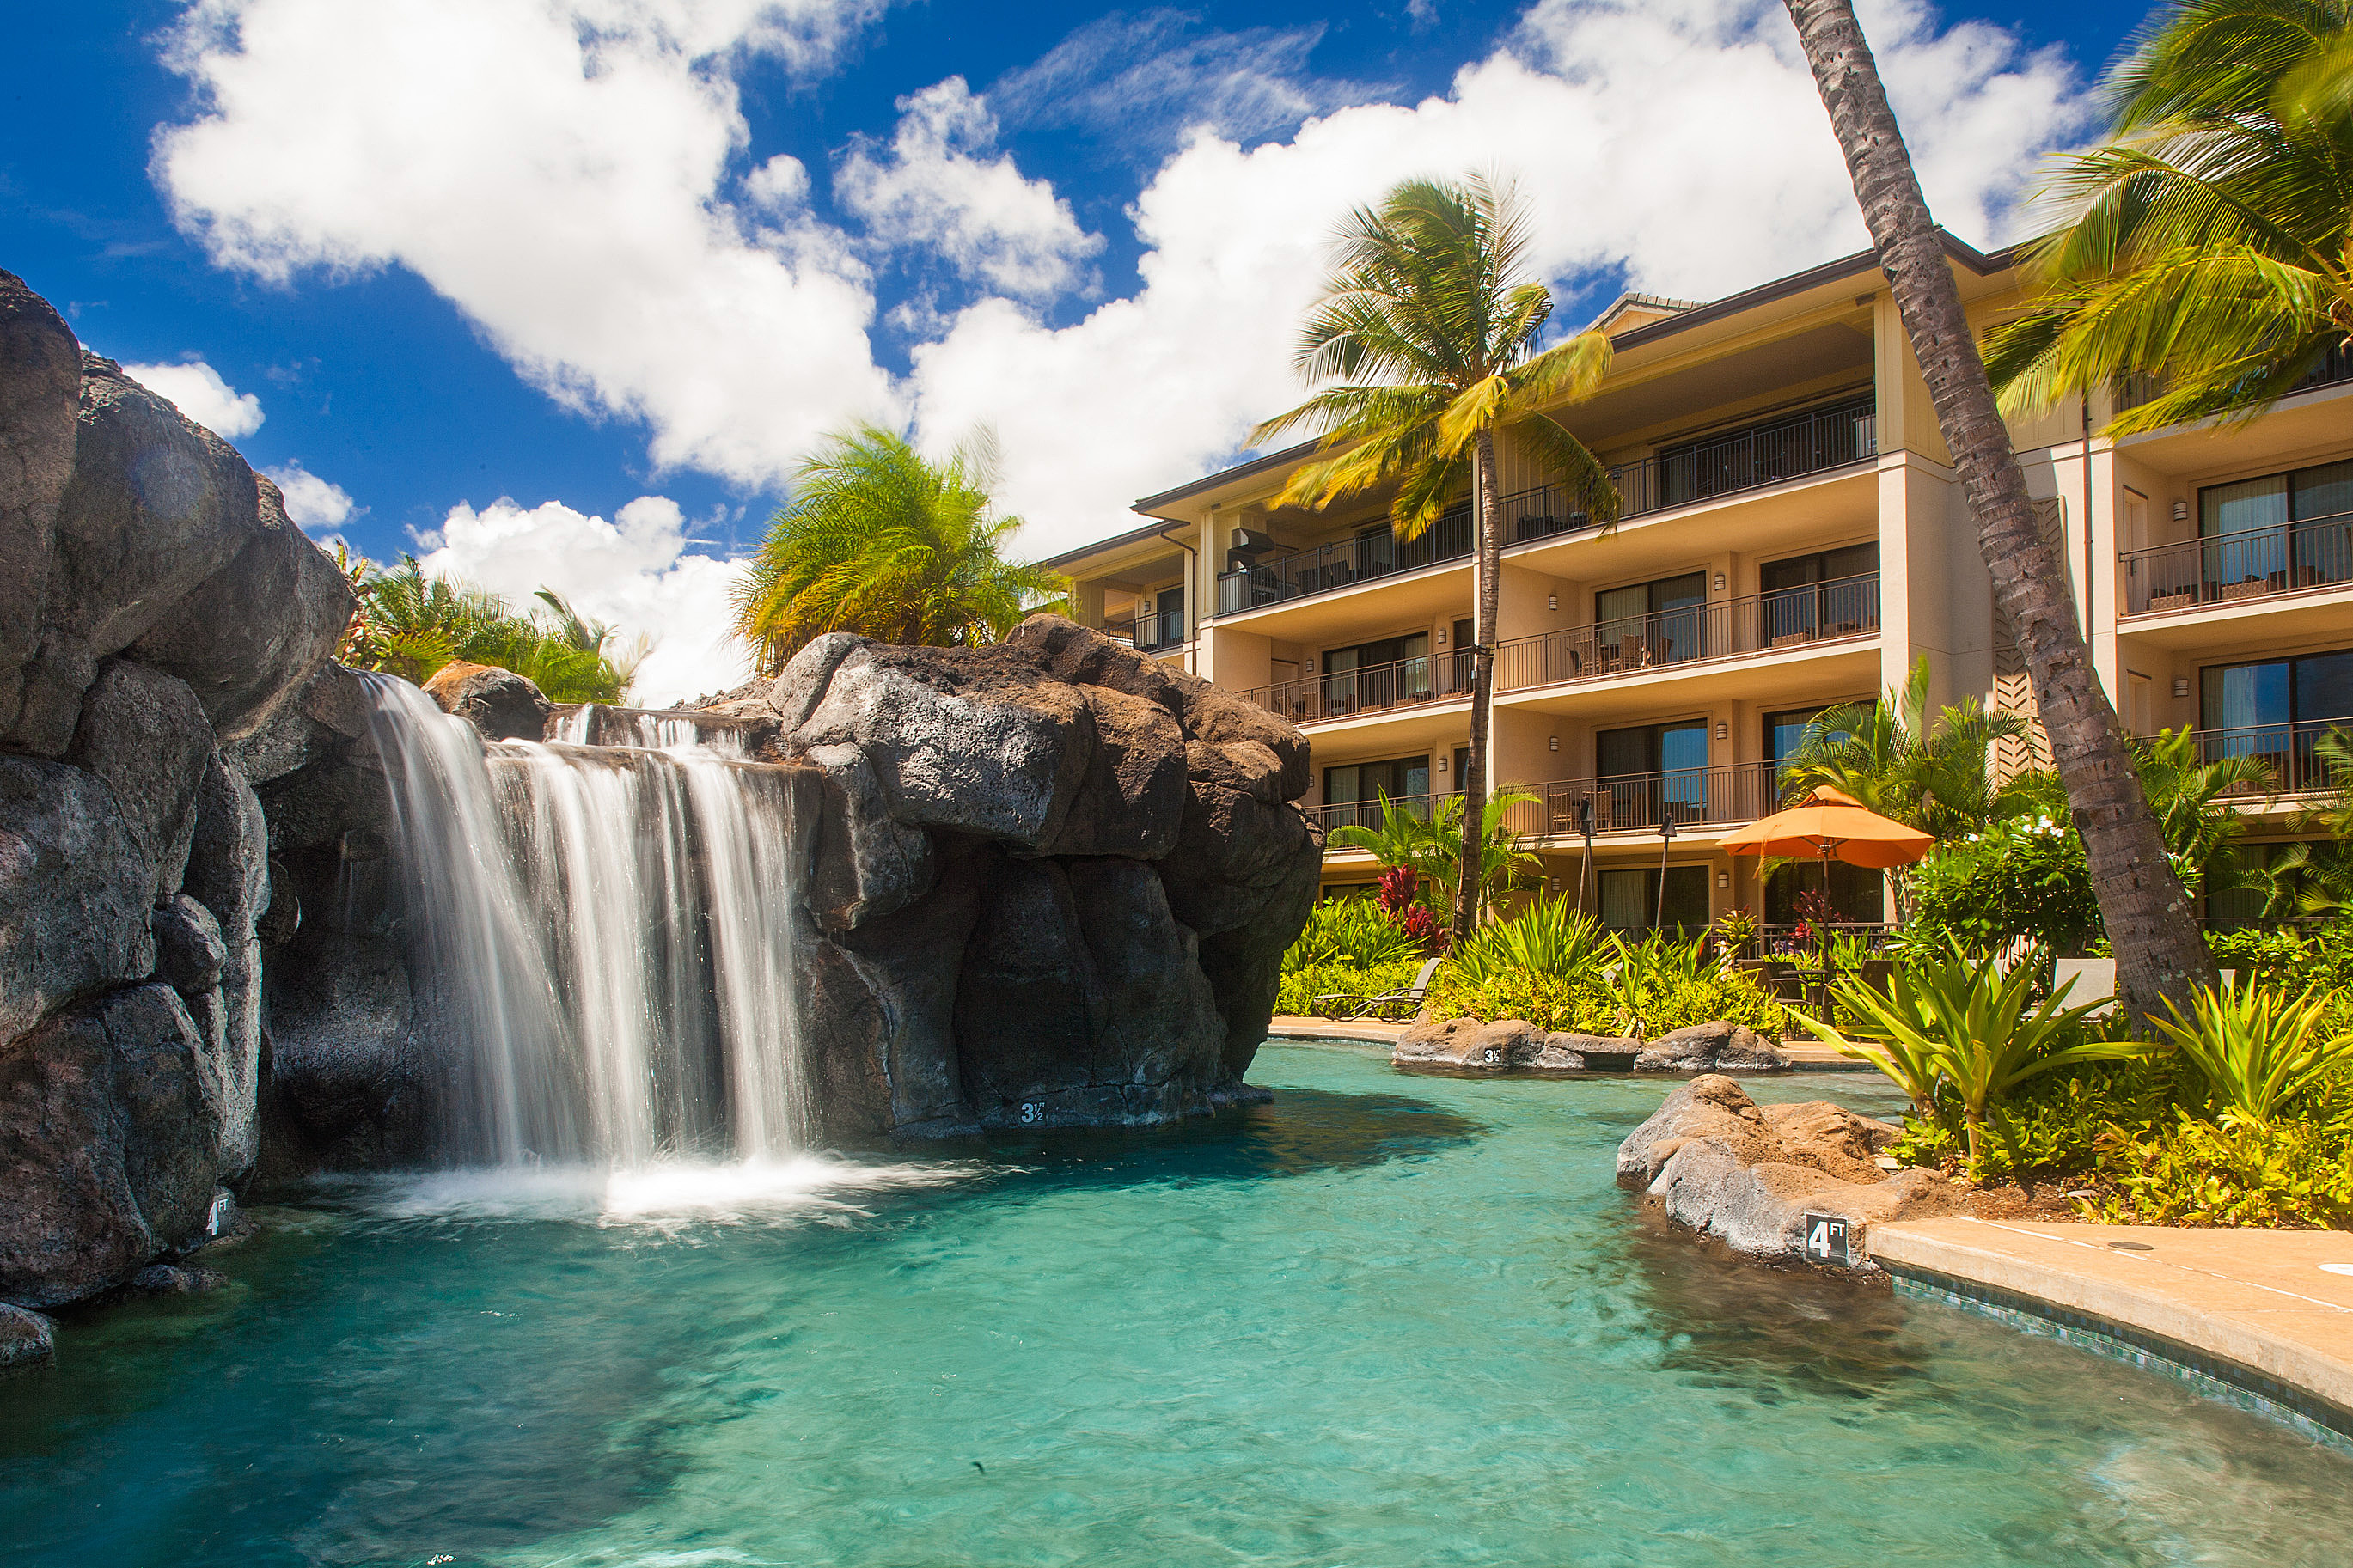 Your very own Waterfall Oasis, right in the back yard of your Villa